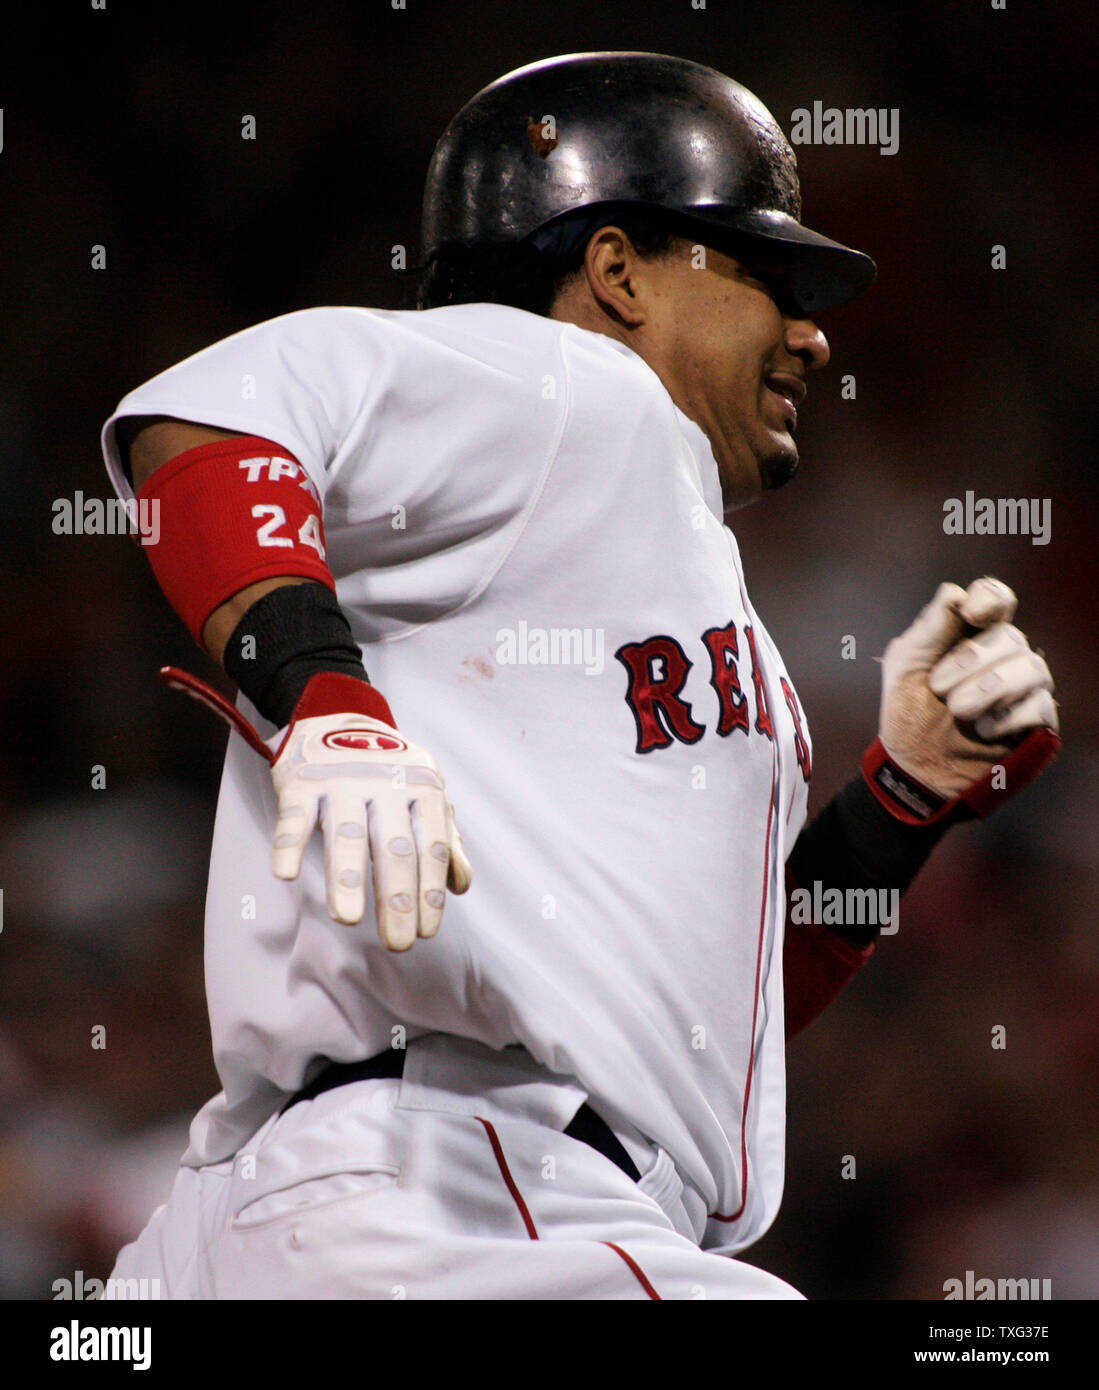 Boston Red Sox left fielder Manny Ramirez rounds the bases during